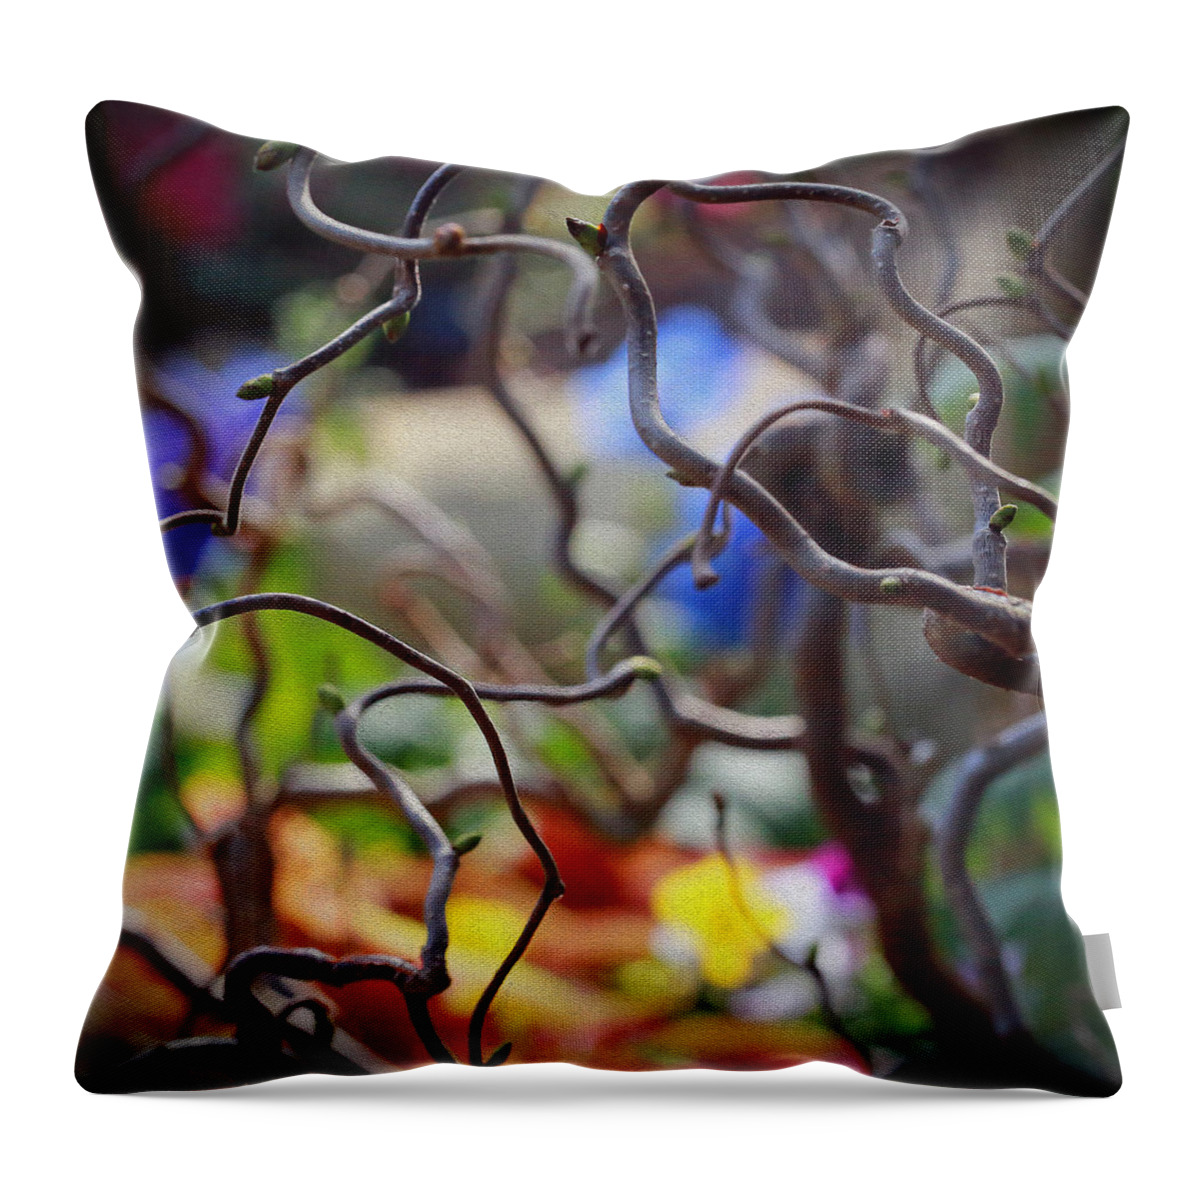 Abstract Throw Pillow featuring the photograph Reverie by Jaki Miller